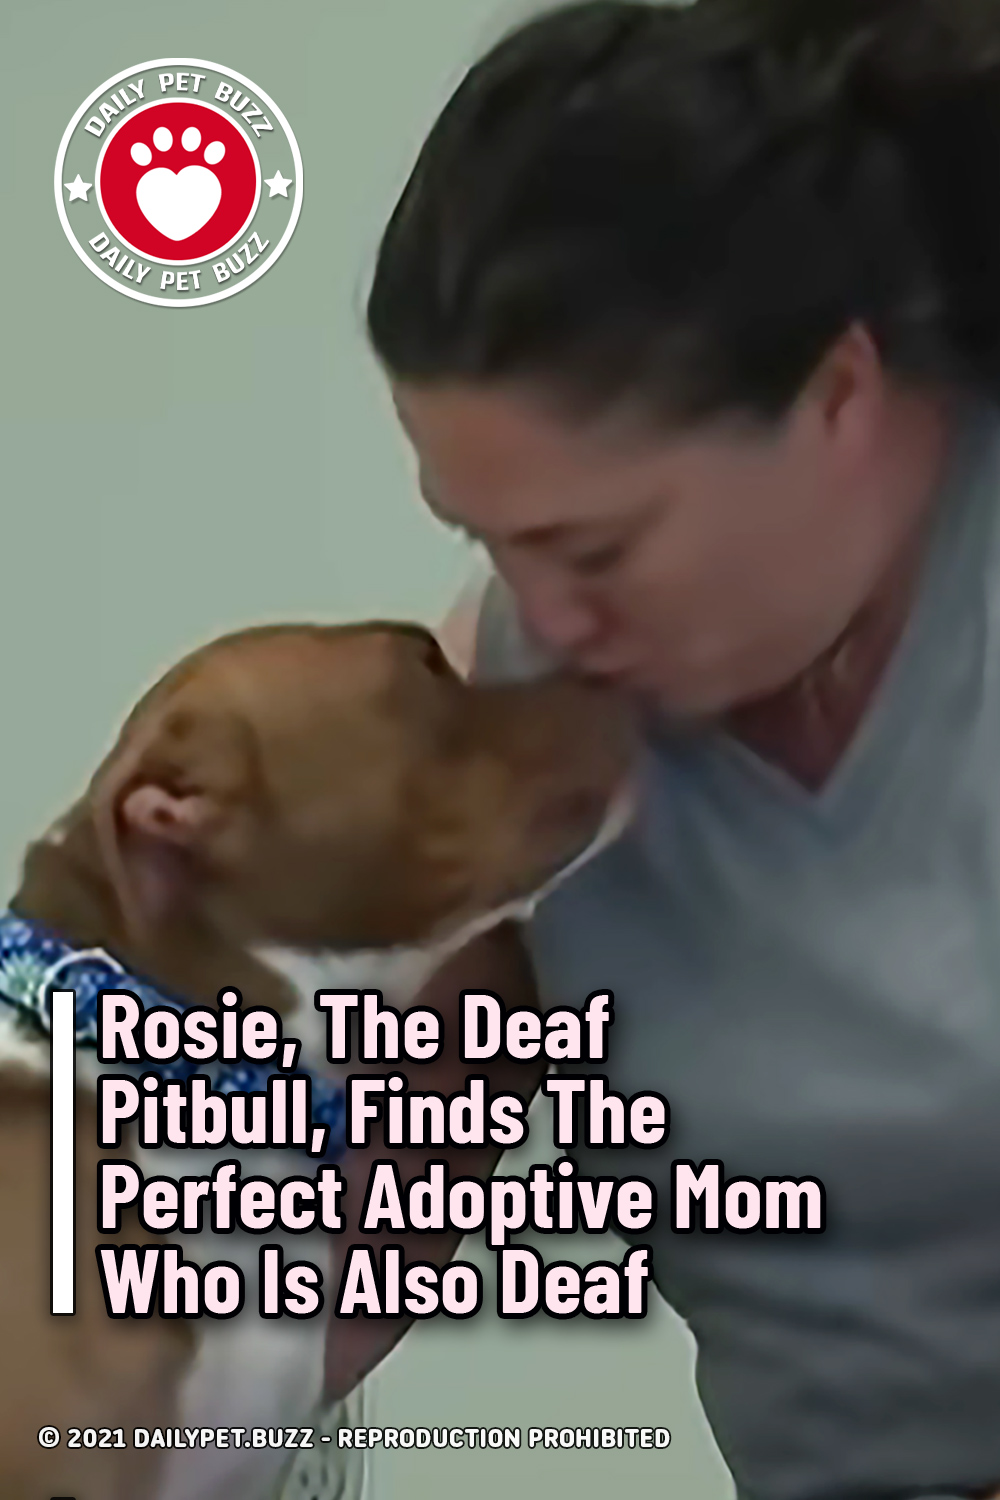 Rosie, The Deaf Pitbull, Finds The Perfect Adoptive Mom Who Is Also Deaf